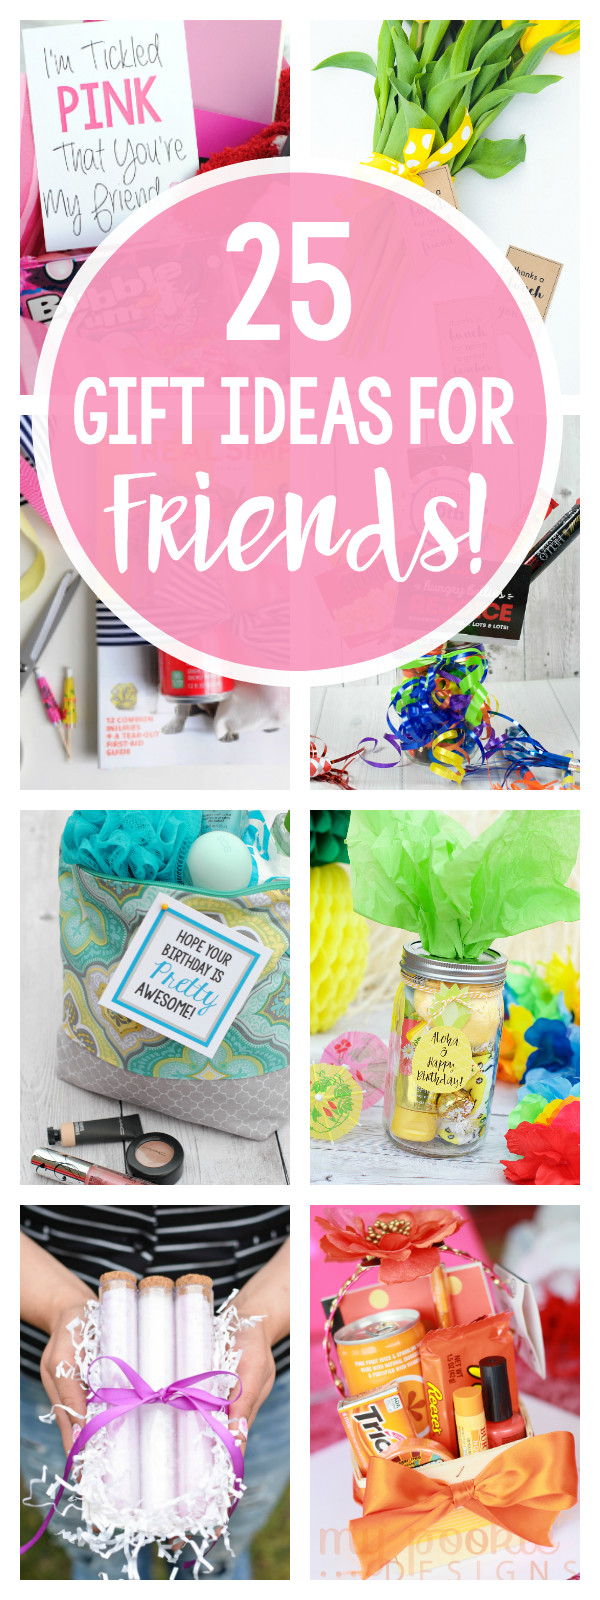 Cute Birthday Gift Ideas For Friend
 25 Gifts Ideas for Friends – Fun Squared